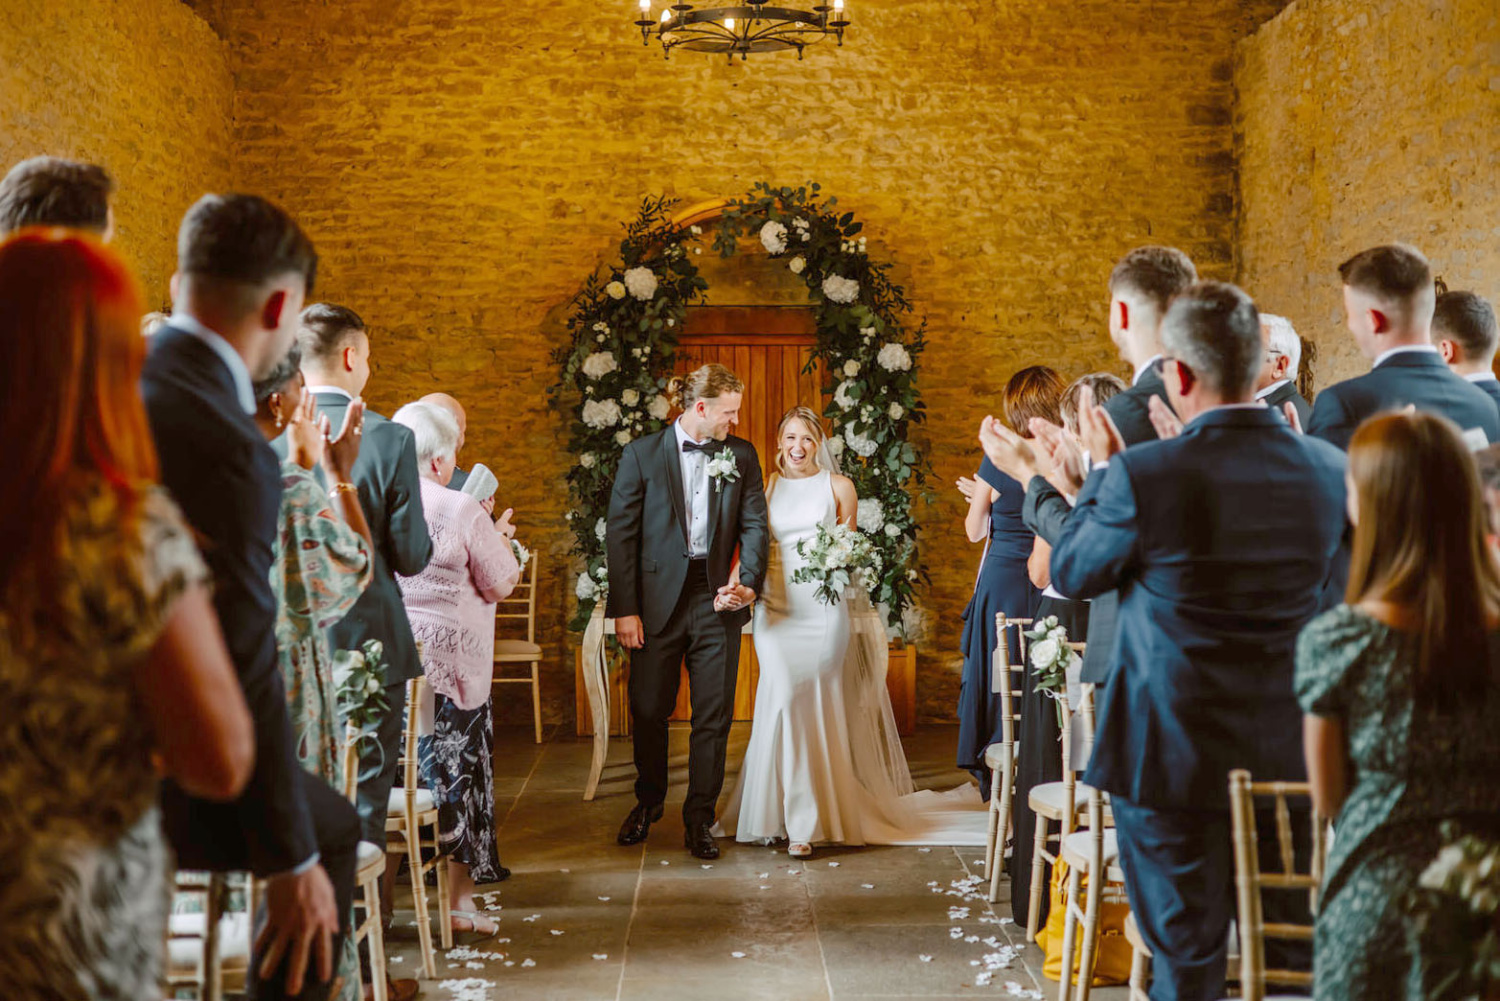 A bride and groom walking down the aisle at their wedding ceremony Stratton Court Barn.